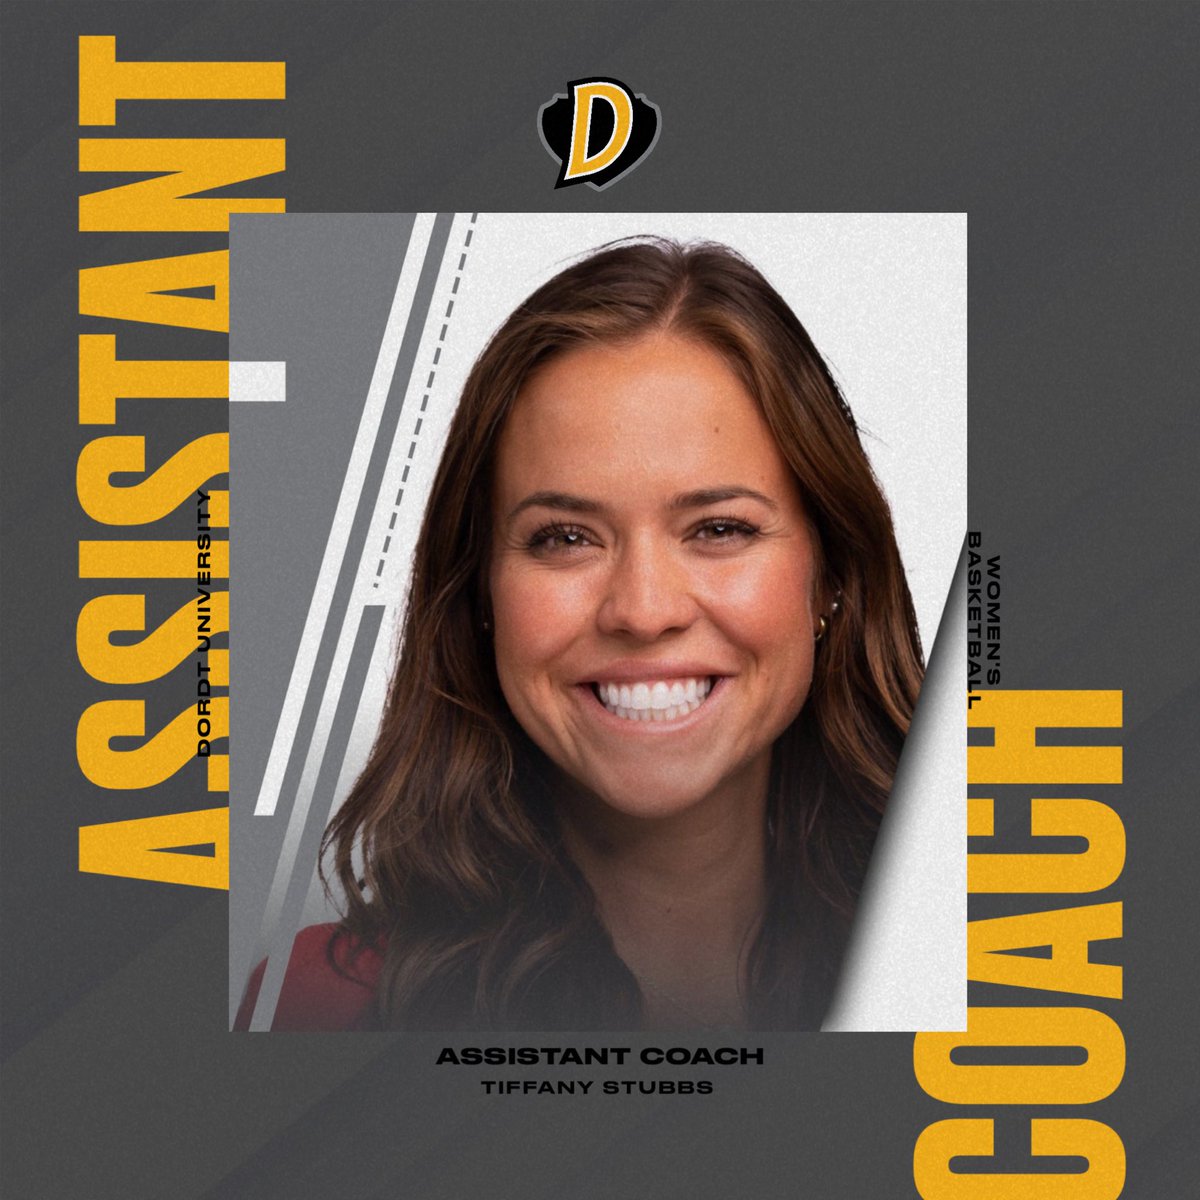 We are excited to welcome @TiffanyStubbs4 to our Dordt WBB staff!! 🏀⚔️ . - 23-24 University of Montana Assistant Coach - 21-22, 22-23 head coach Southwest Chr (MN) - Head coach Concordia Academy (MN) - 2021 MN Section 4AA Coach of the Year - 2023 MN Section 2AA Coach of the Year